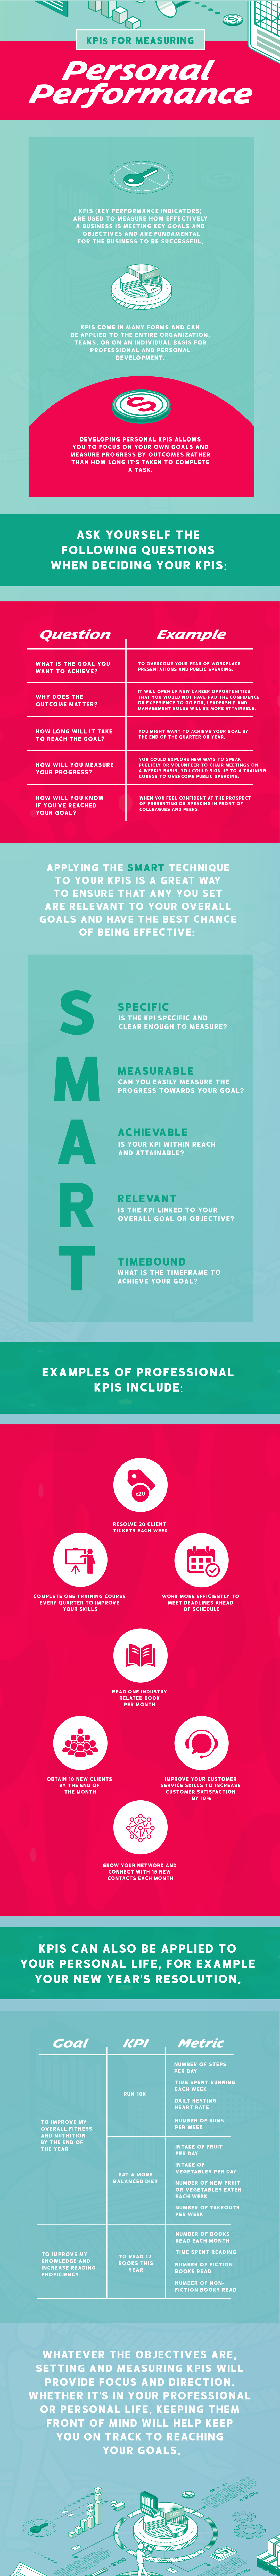 KPIs for measuring personal performance infographic